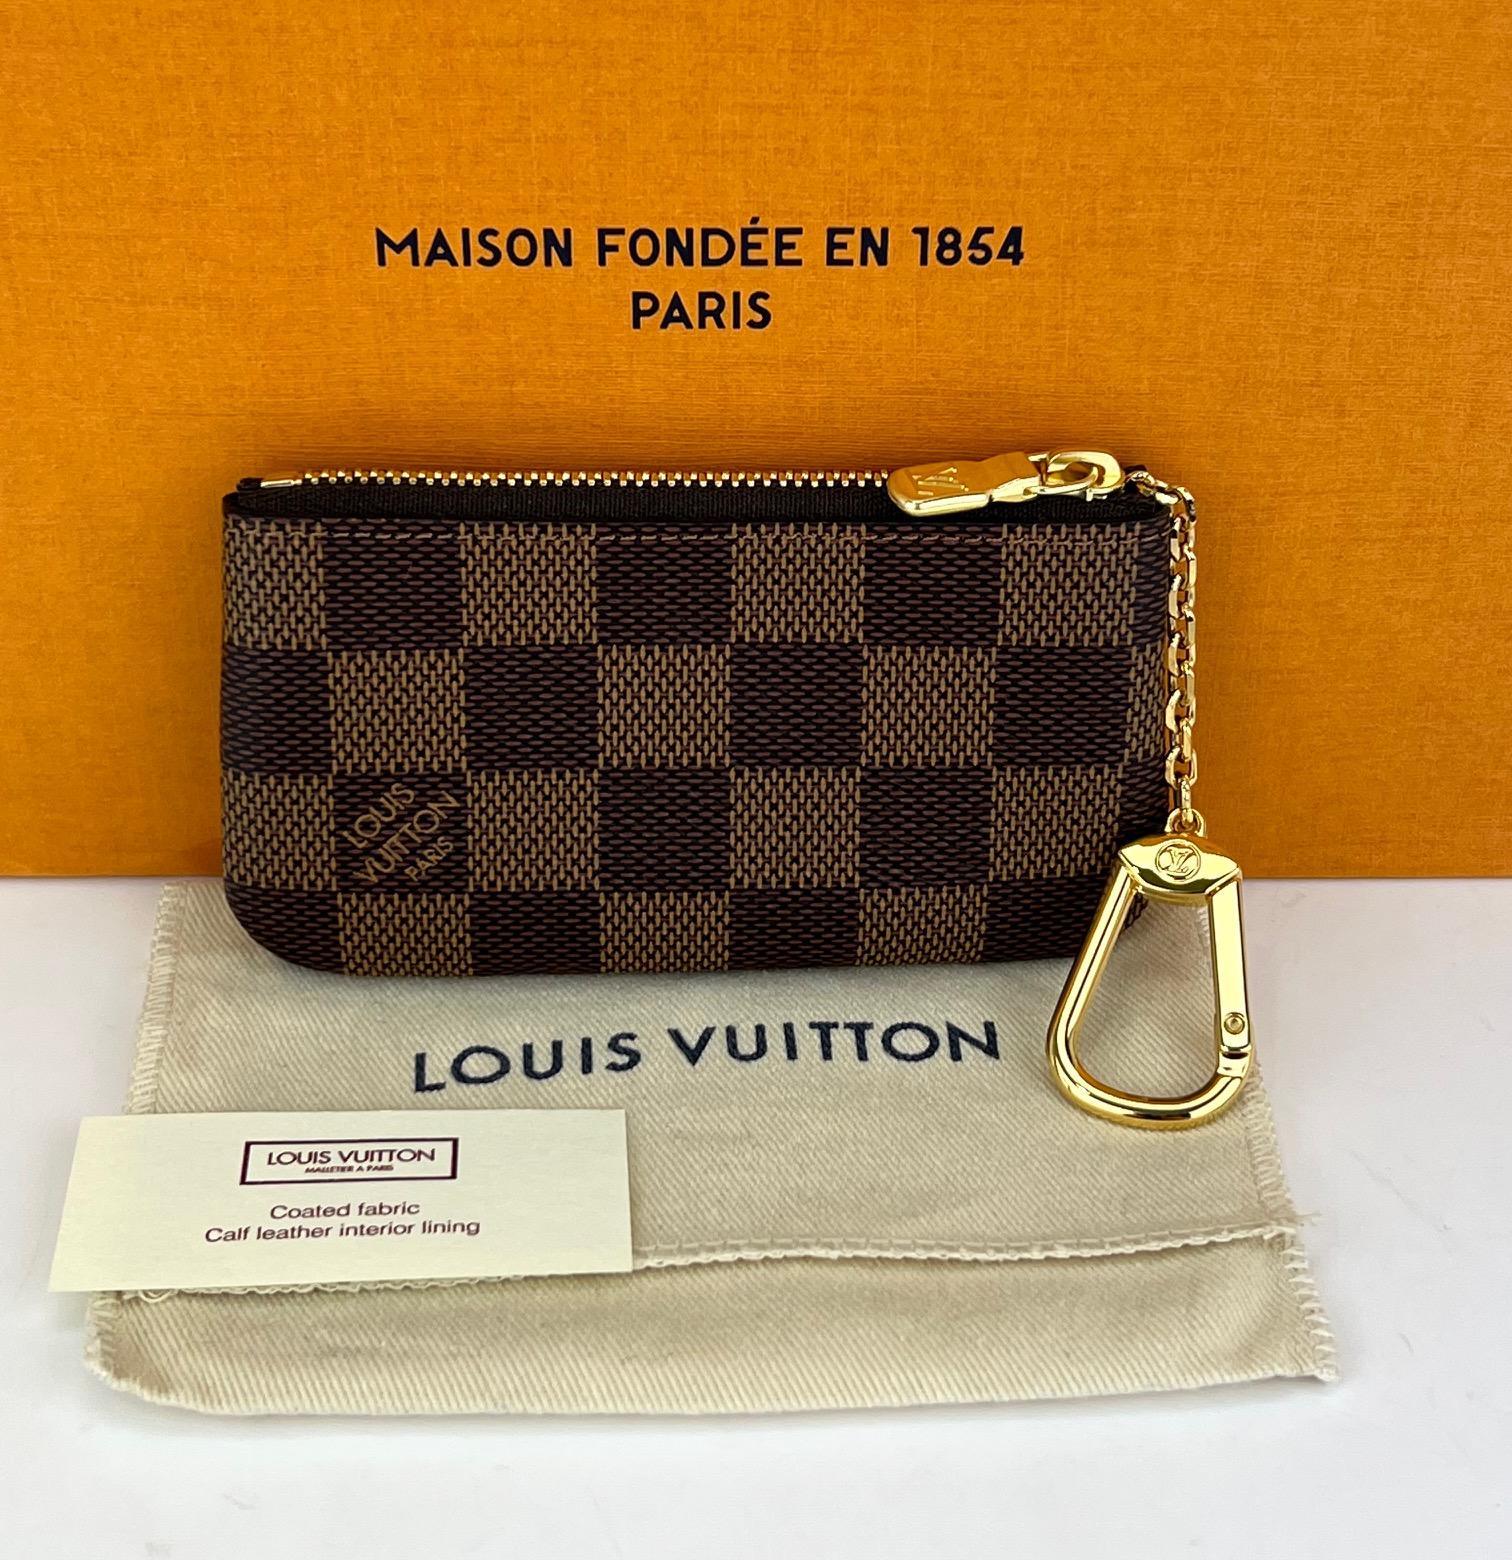 Preowned 100% AUTHENTIC
Louis Vuitton Key Pouch Damier Ebene
Use as a Bag Charm, Tiny Clutch, or Key Chain 
RATING: A...excellent, near mint, only 
slight signs of wear
INTERIOR: tiny wear by letters
DATE CODE: SD3231
MATERIAL: Damier ebene